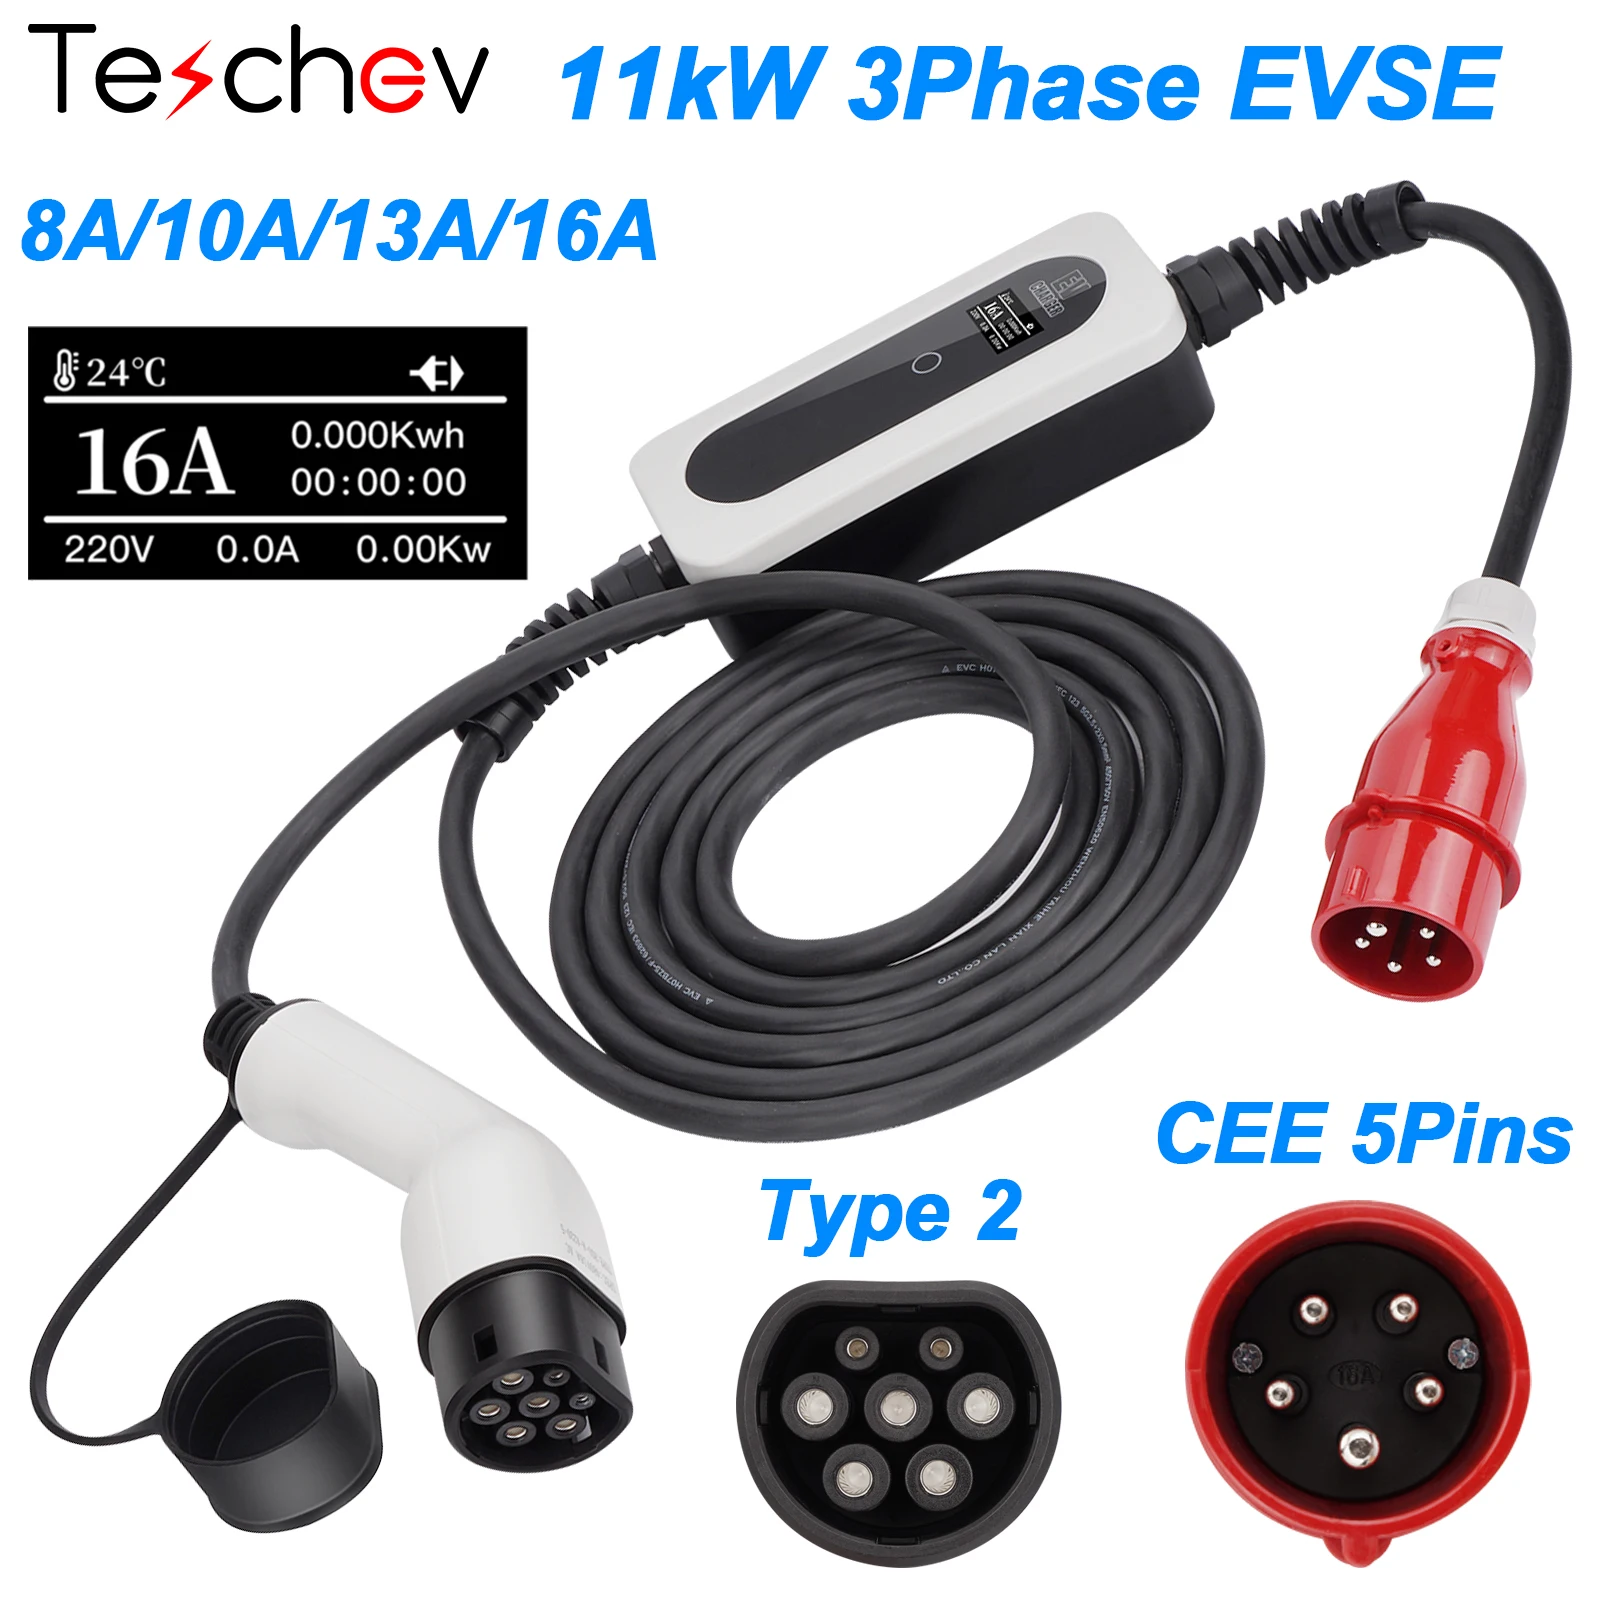 

11kw Ev Charger Type2 3 Phase 16A IEC 62196 CEE Red Plug Portable Charger Fast Charging EVSE Electric Vehicles Three Phase